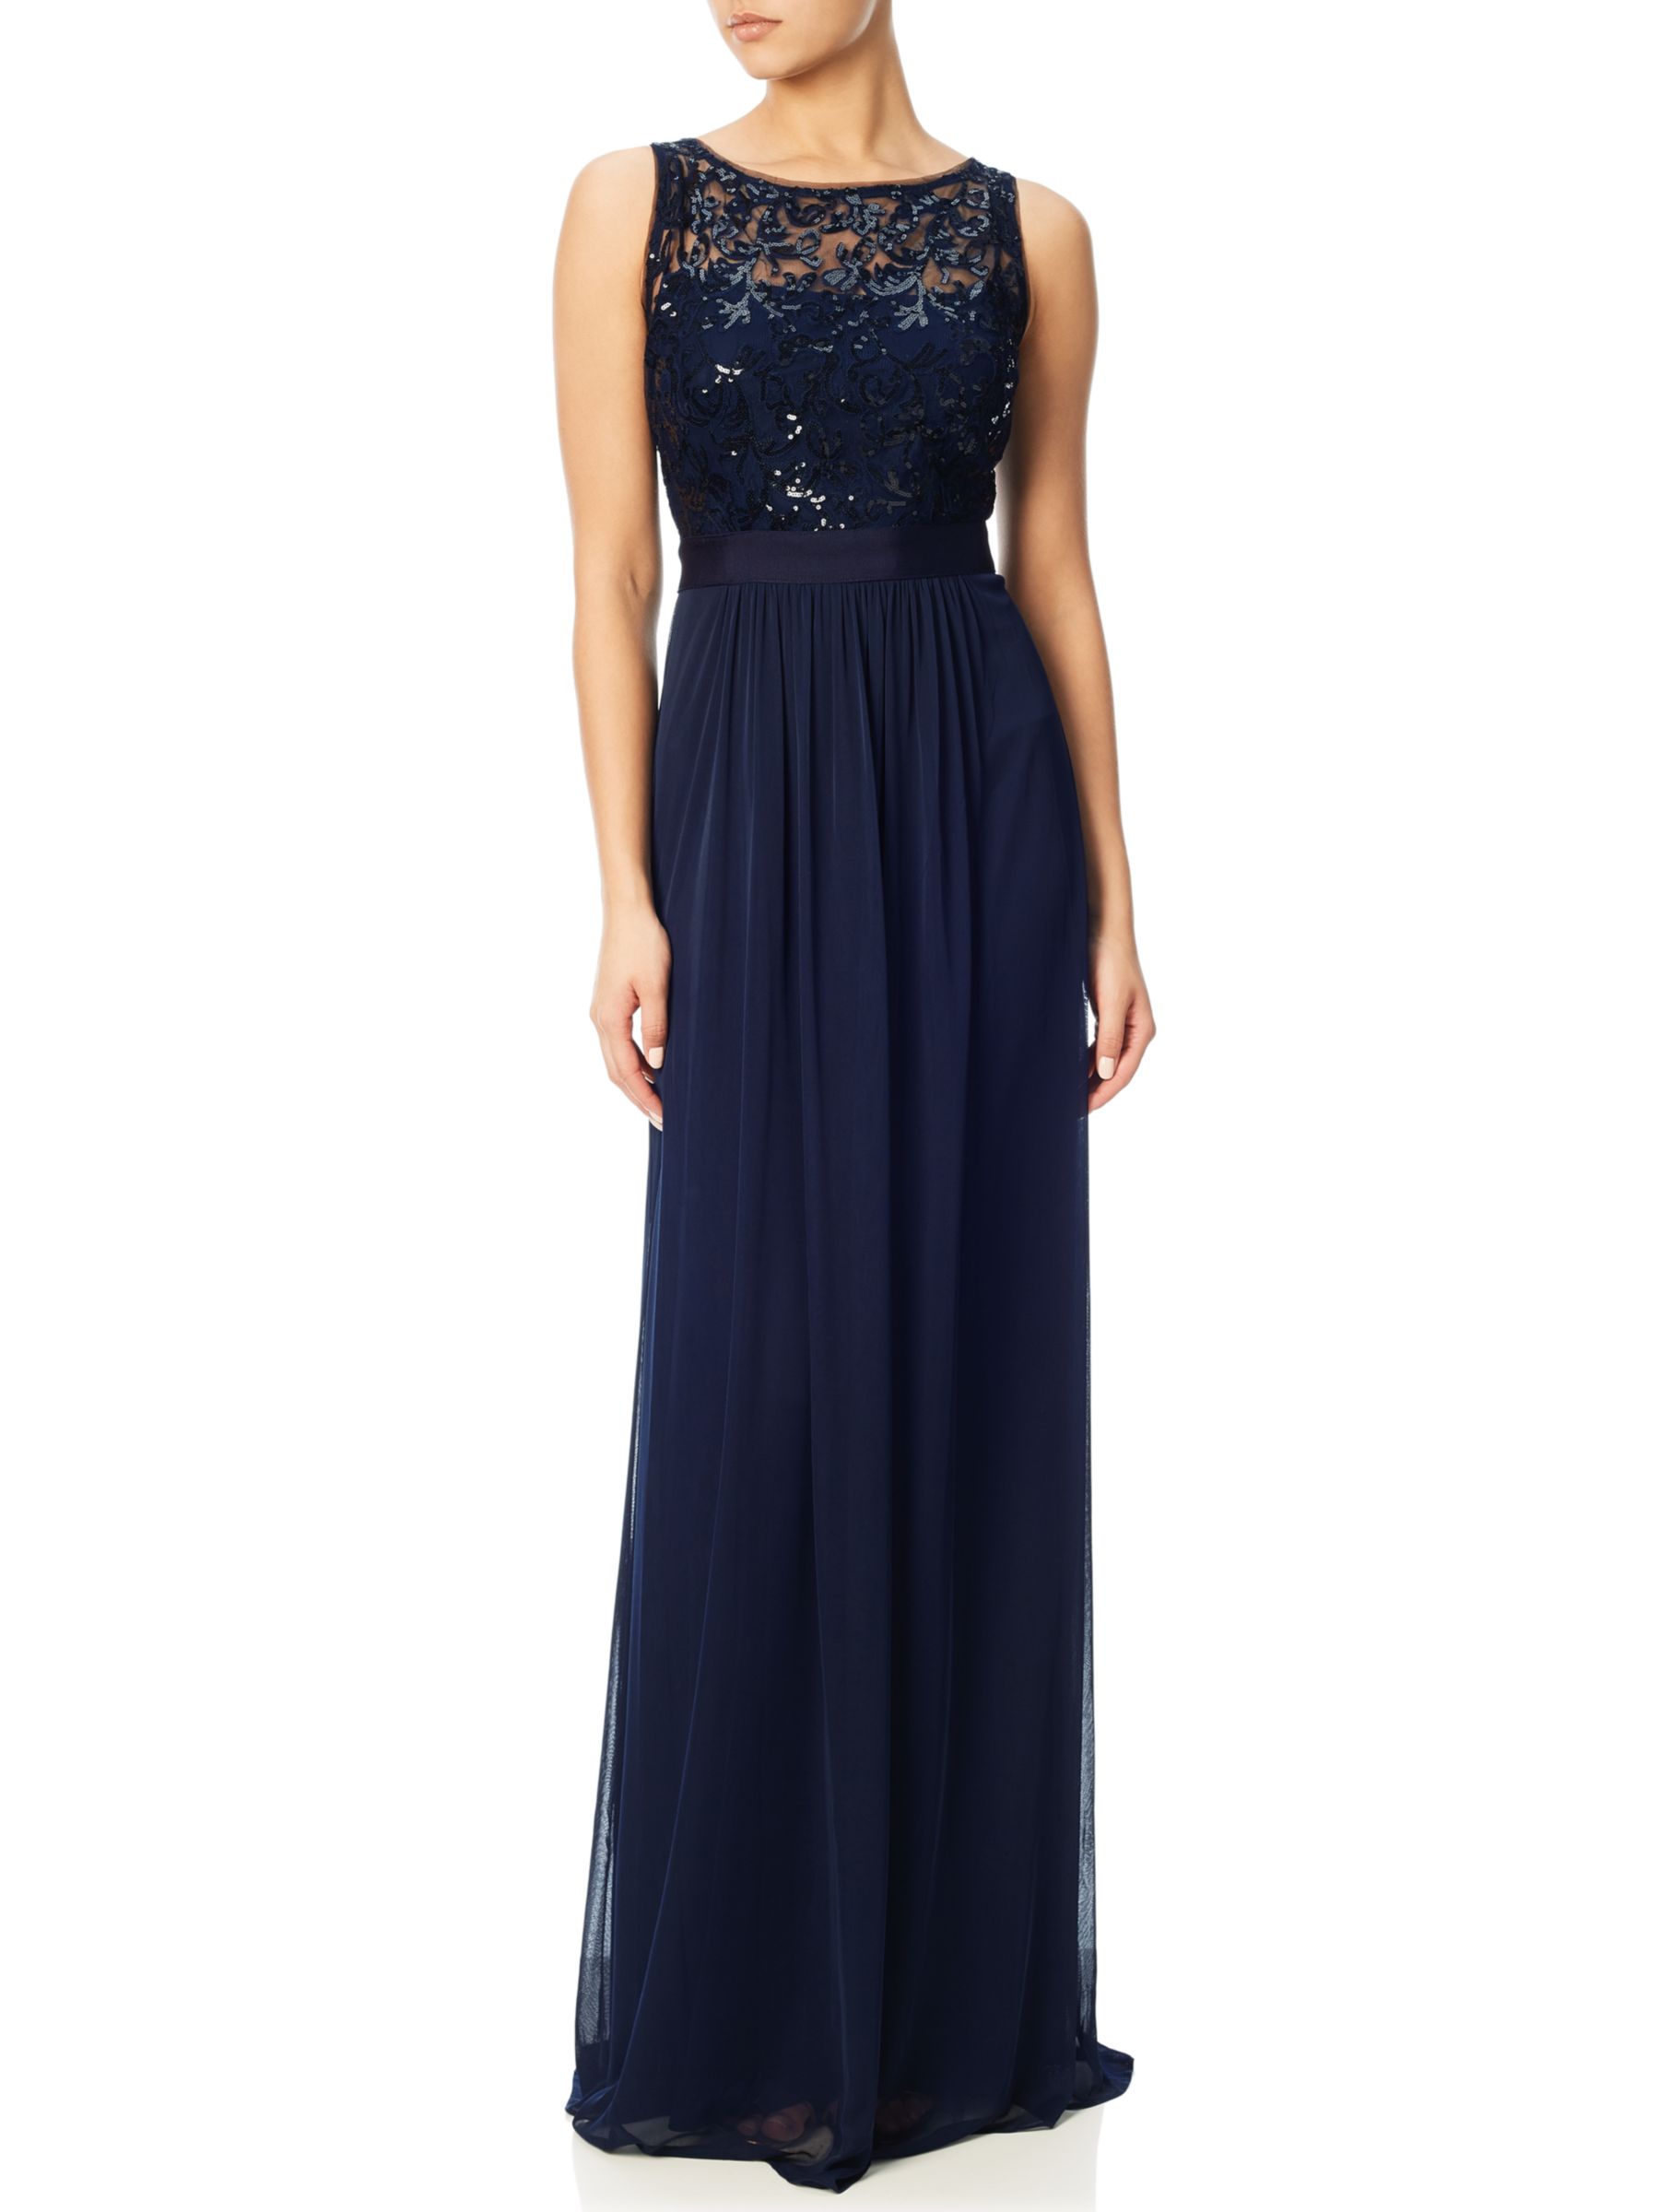 Adrianna Papell Sequin Mesh Stretch Tulle Gown, Midnight at John Lewis ...